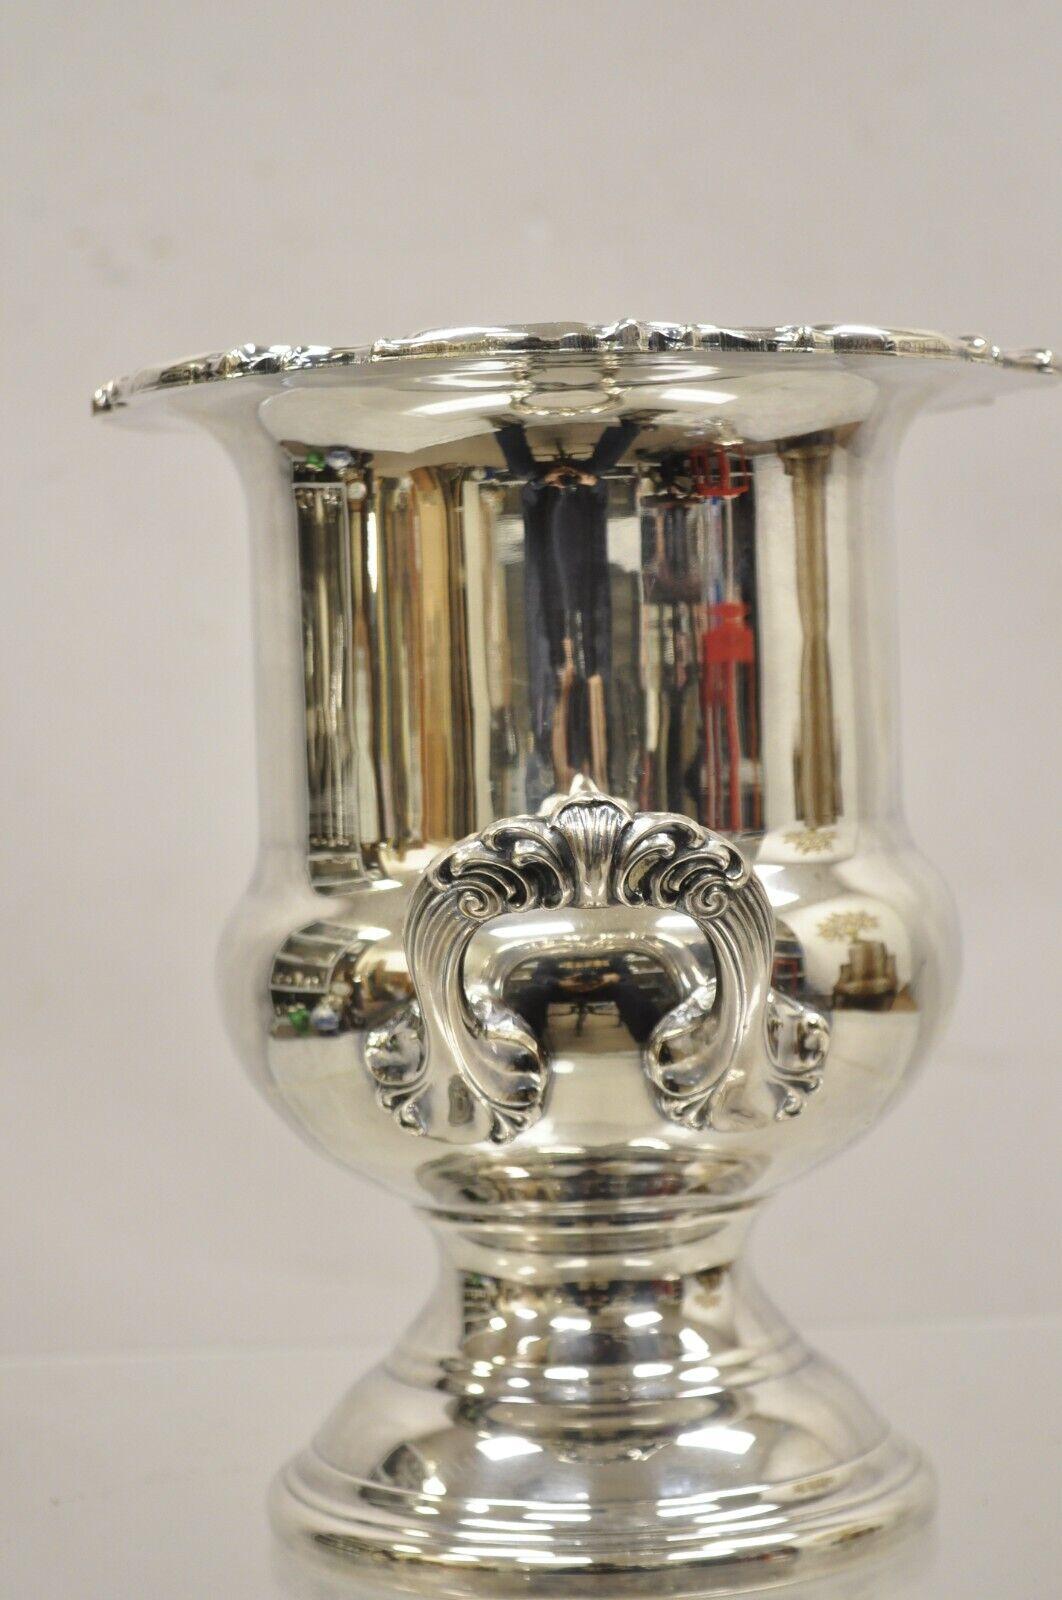 Silver Plated Trophy Cup Victorian Style Champagne Chiller Wine Ice Bucket. Circa Mid 20th Century. Measurements: 10.5